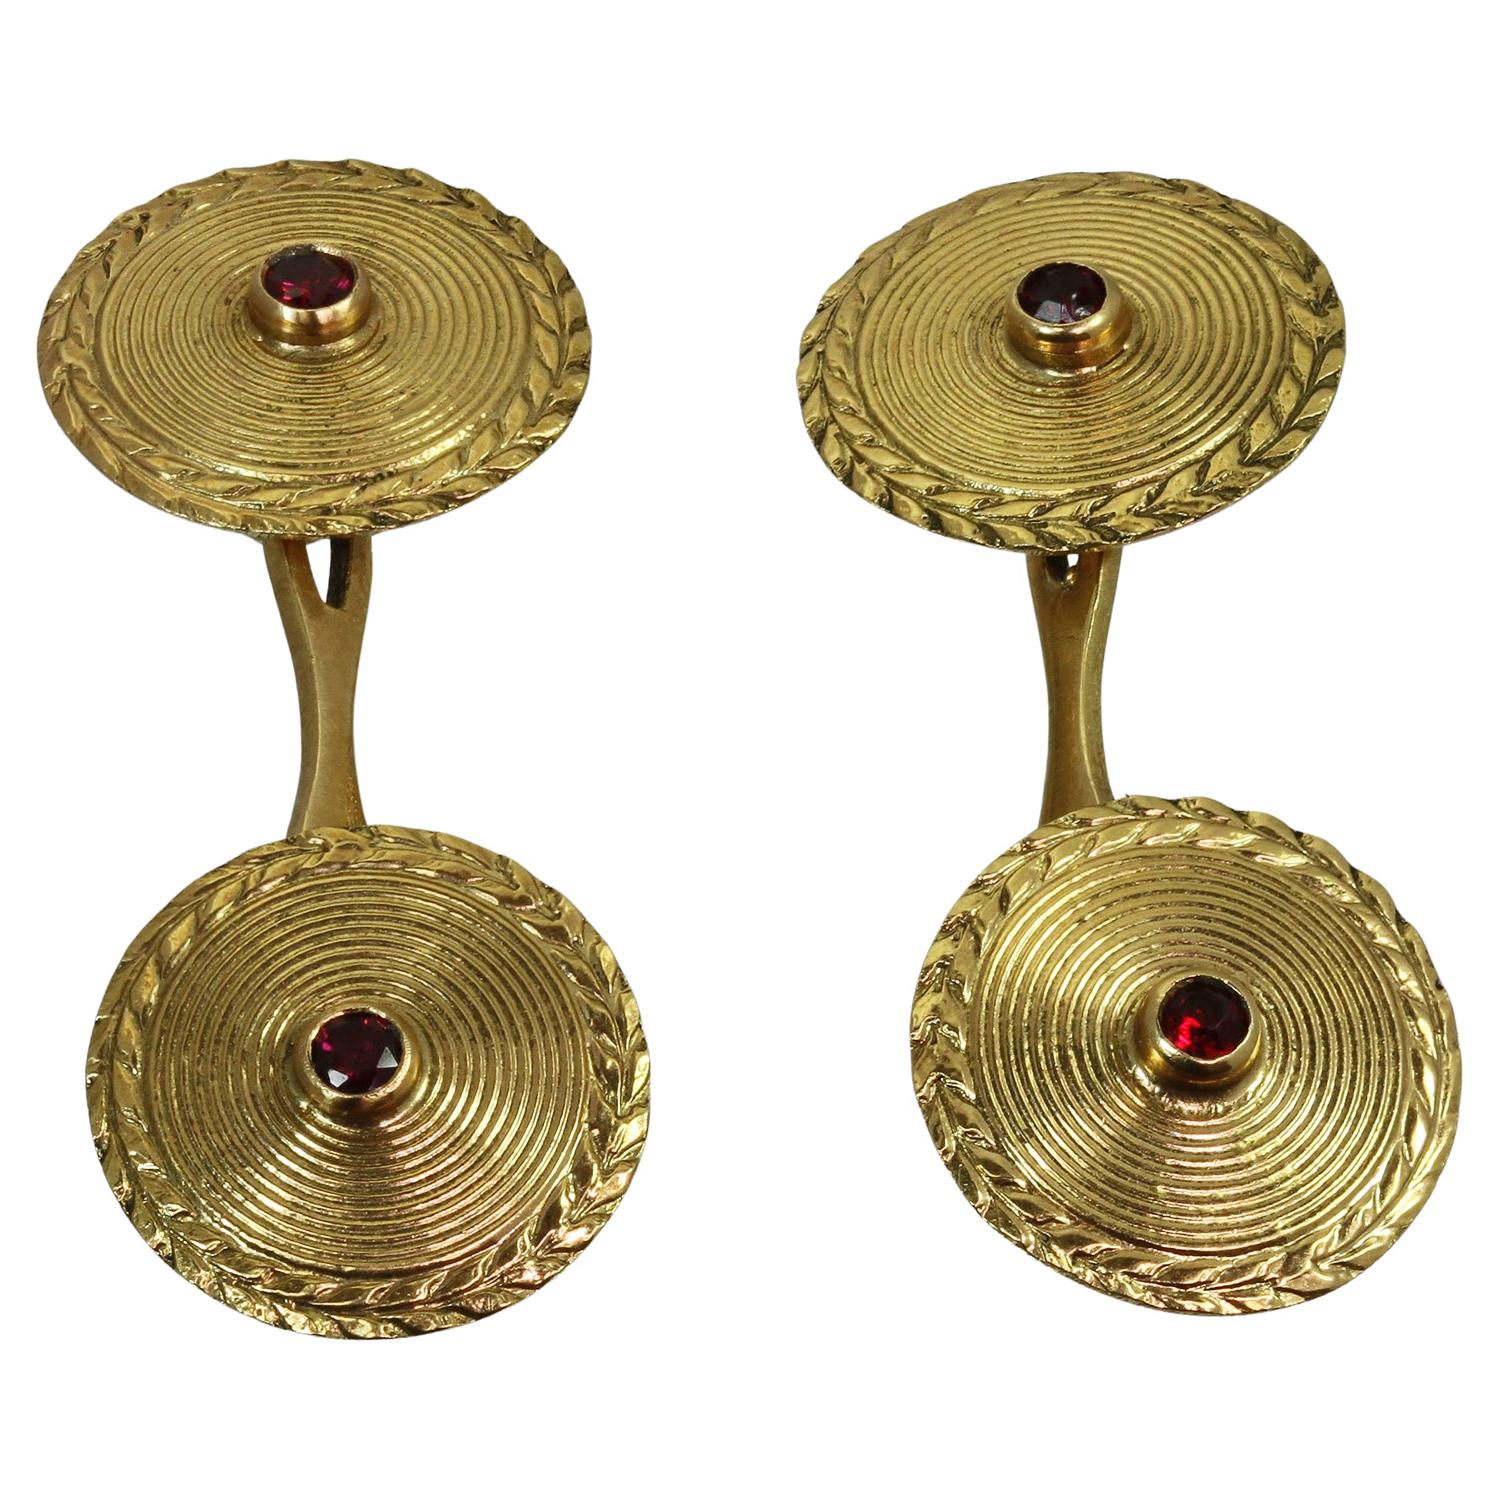 These rare French antique round cufflinks feature a double-sided decorative design crafted in 18k yellow gold and accented with round red rubies. Made in France circa 1930s. Measurements: 0.55